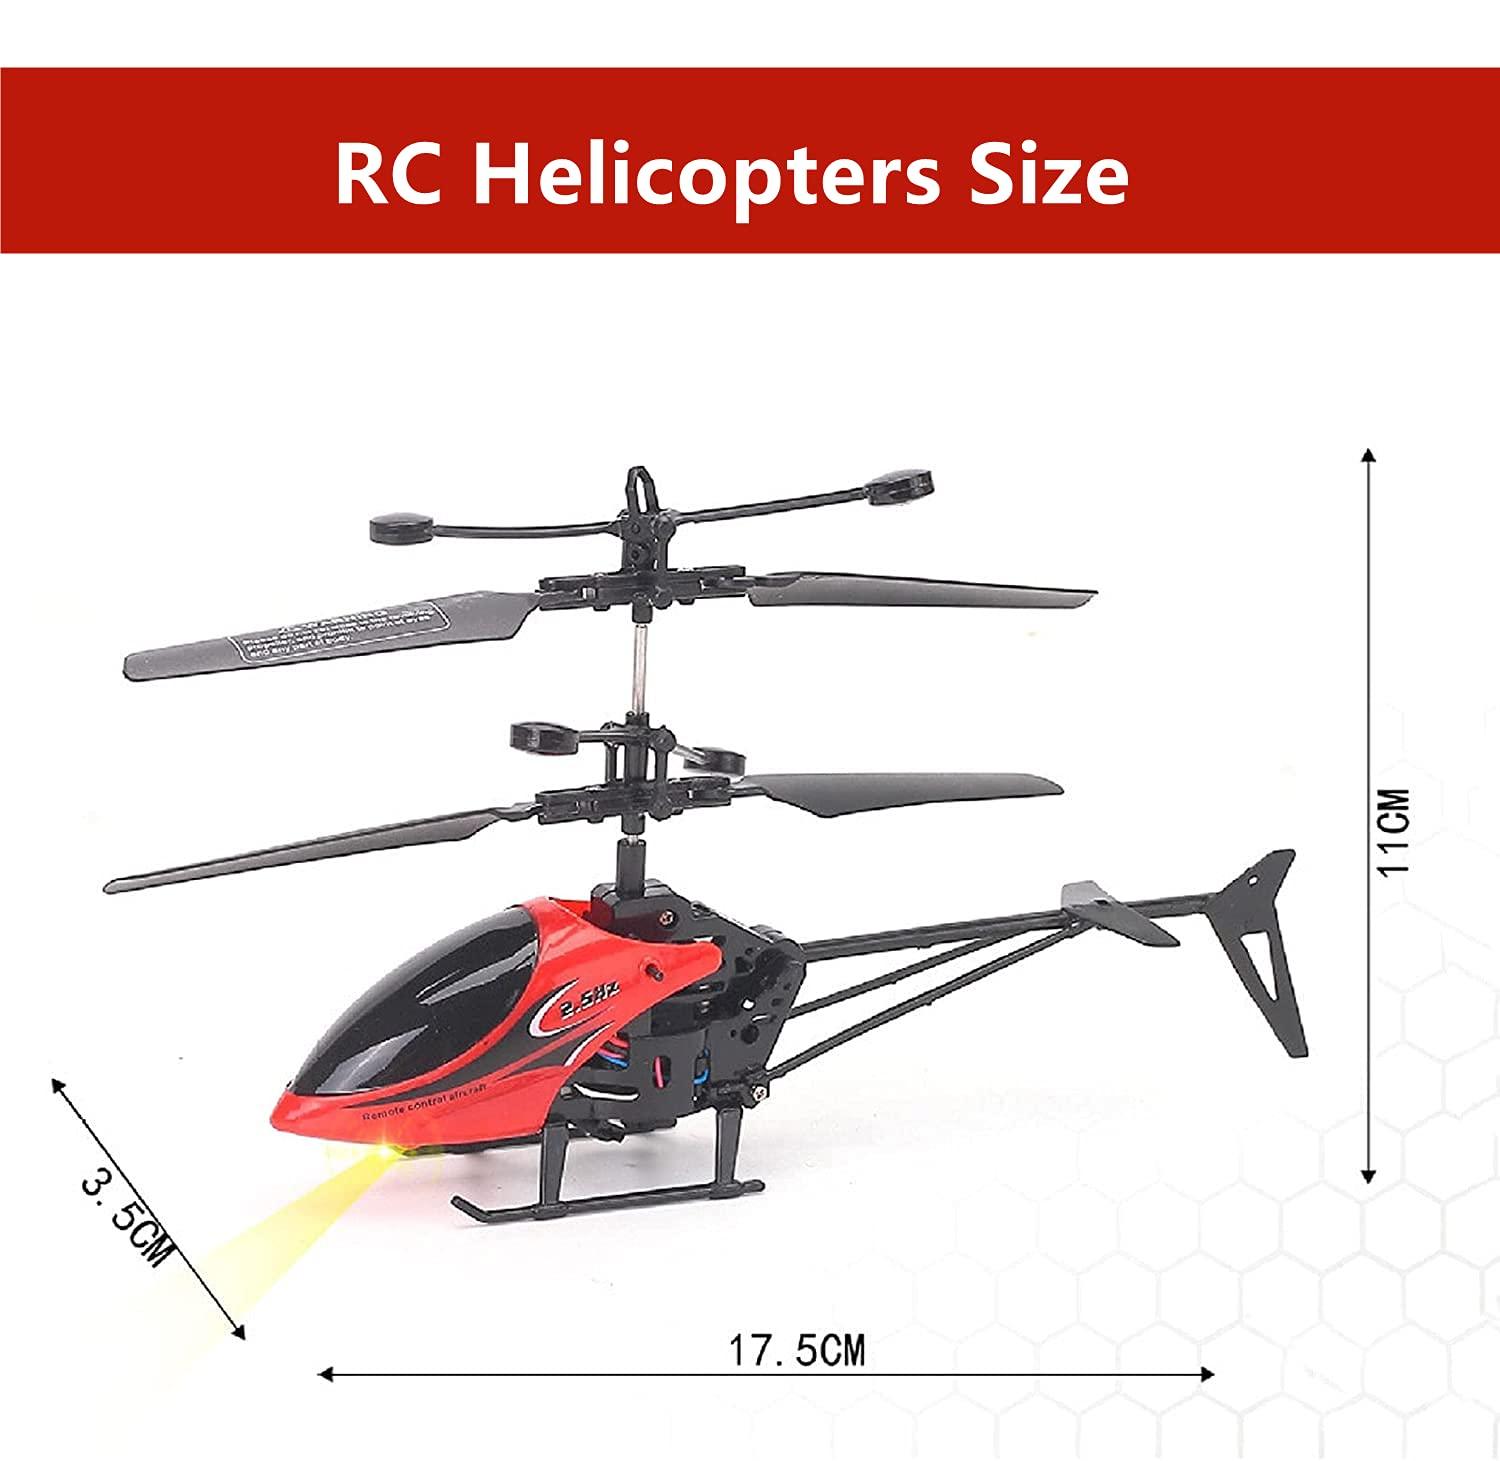 Remote Control Helicopter 200: 5-7 minute flight durations make this helicopter the perfect choice for short bursts of entertainment.